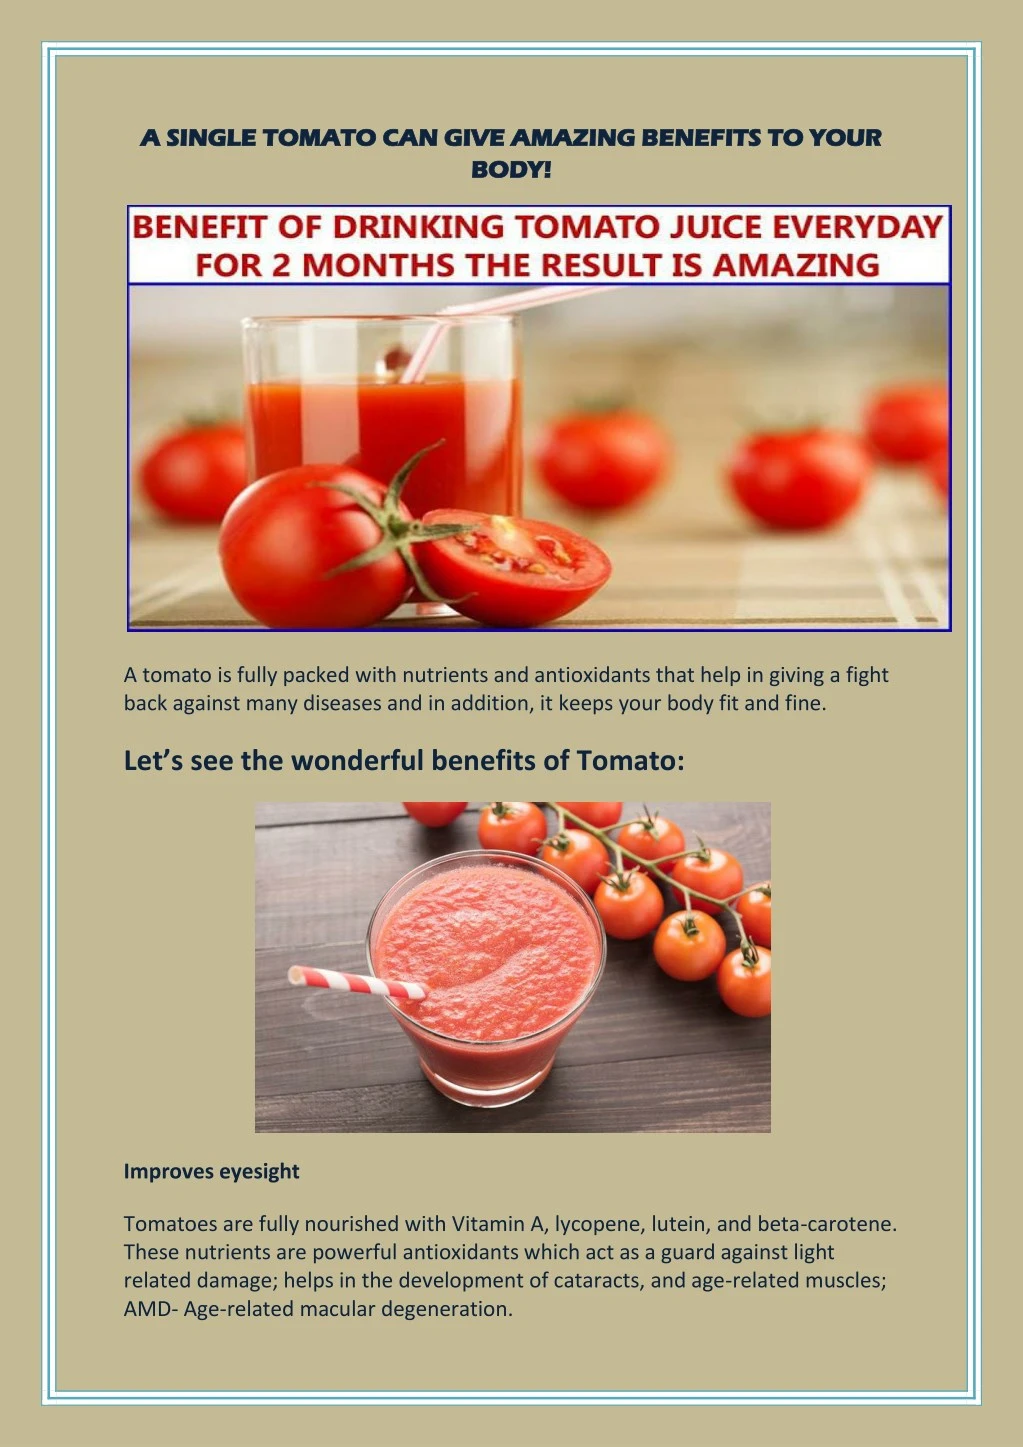 a single tomato can give amazing benefits to your